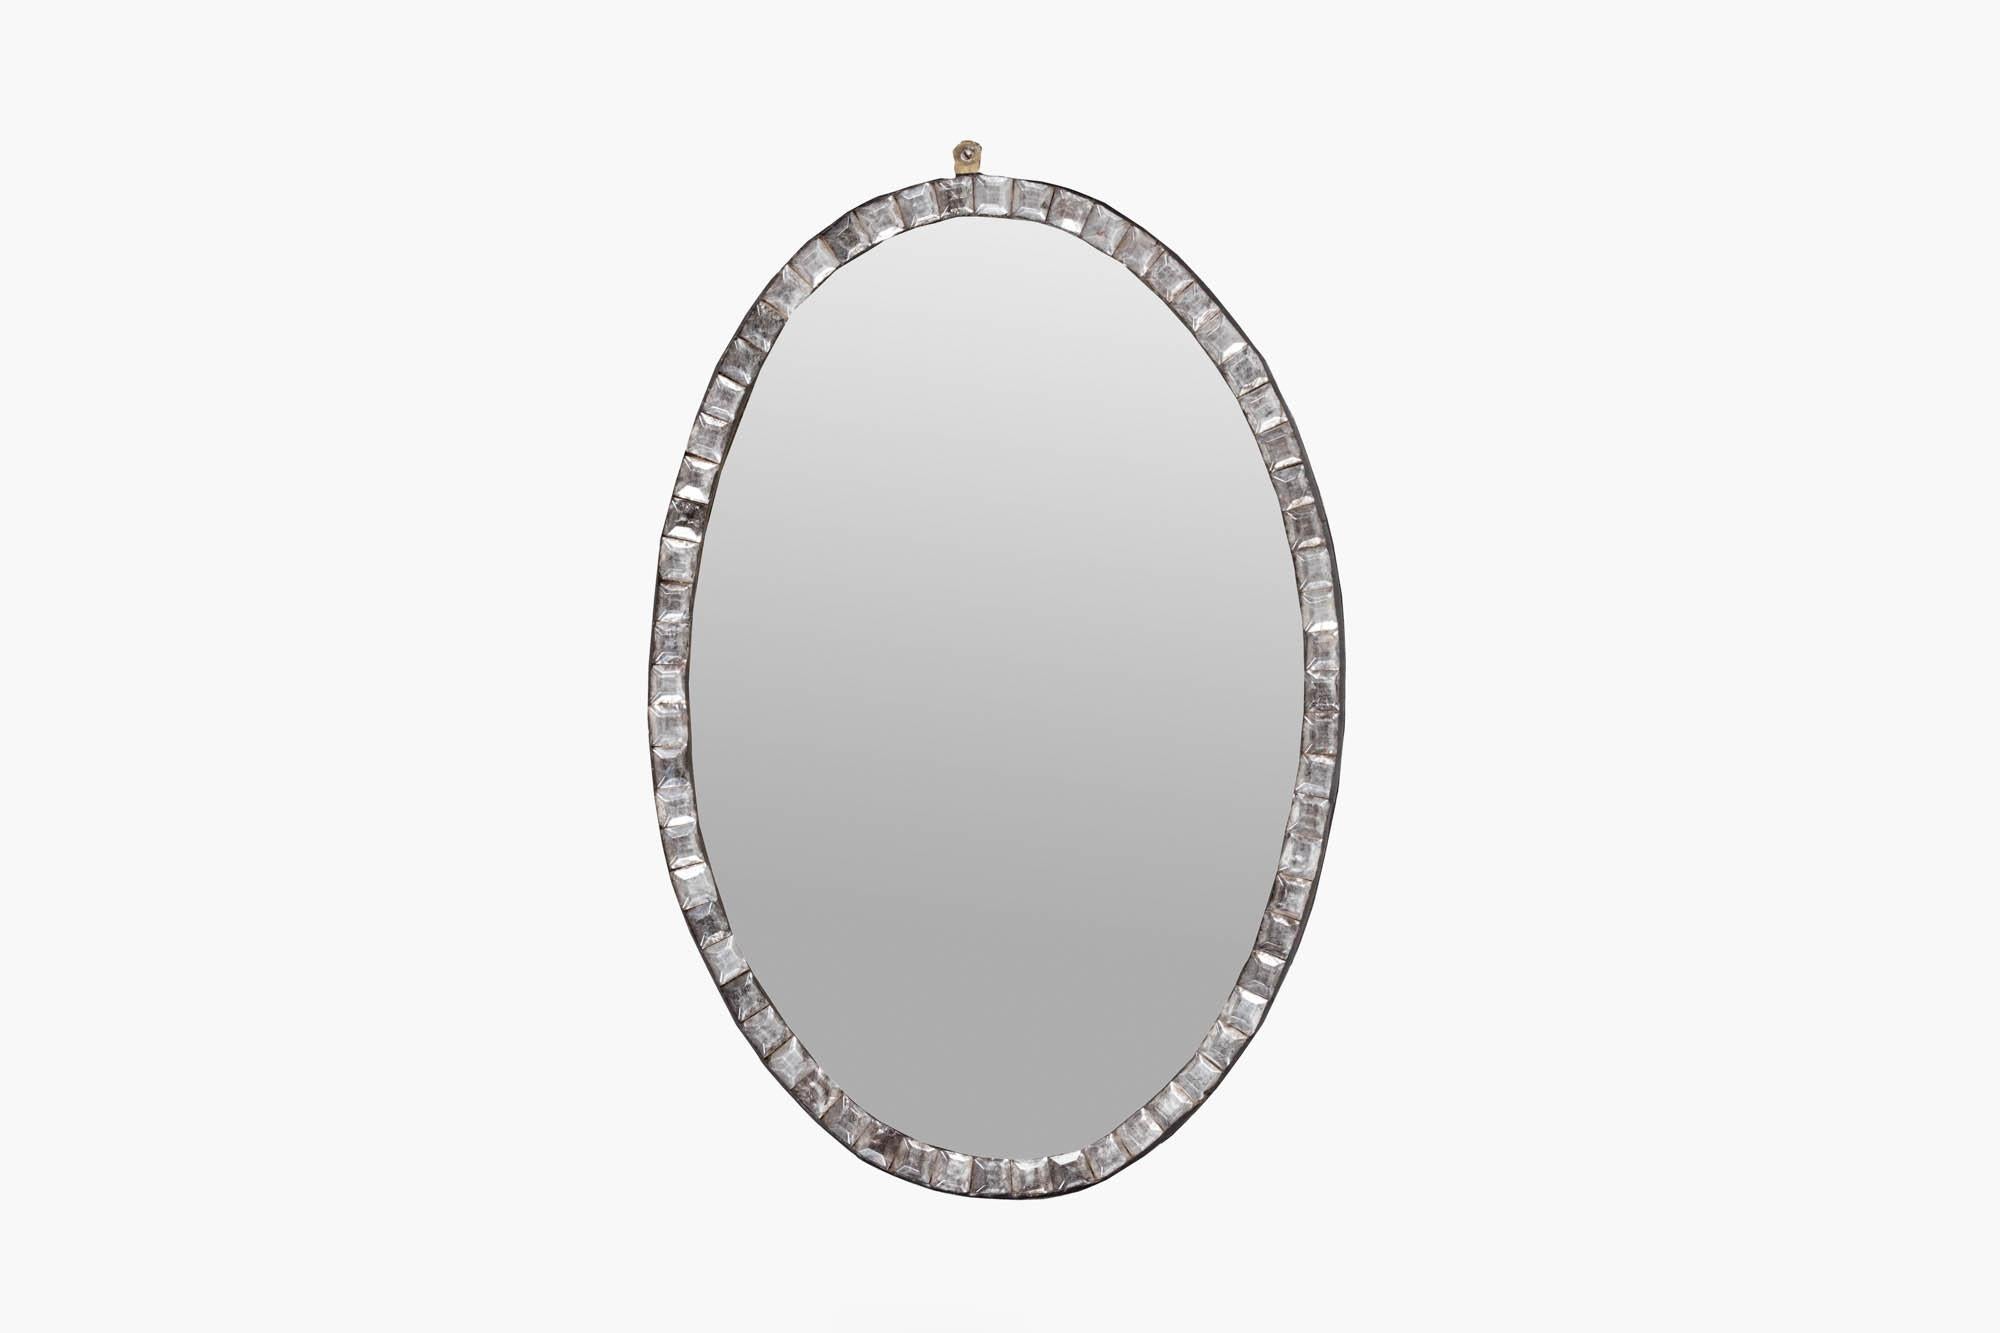 Early Irish Waterford oval mirror with beveled glass and clear glass studs. This beautifully emulates the Waterford style & features the original glass plate. Circa 1760.